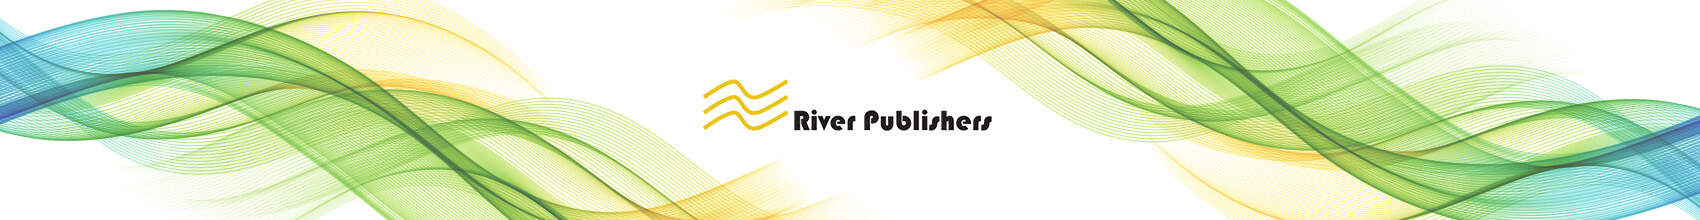 Green, yellow, and white swirled background reading River Publishers in black writing.